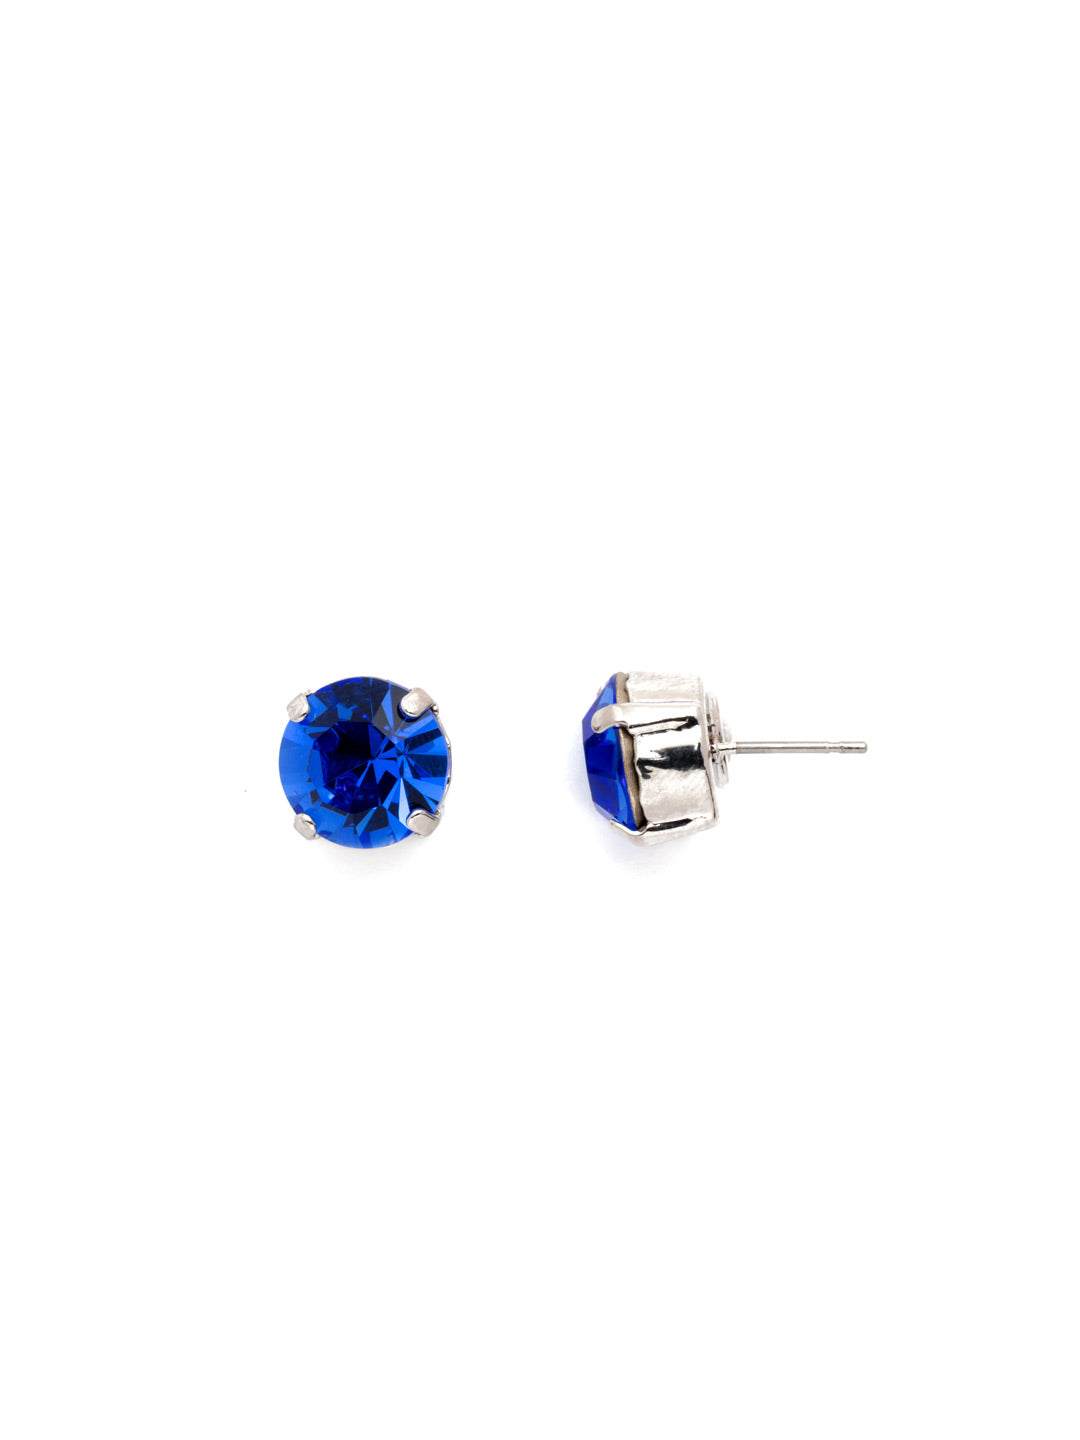 London Stud Earrings - ECM14RHSAP - <p>Everyone needs a great pair of studs. Add some classic sparkle to any occasion with these stud earrings. Need help picking a stud? <a href="https://www.sorrelli.com/blogs/sisterhood/round-stud-earrings-101-a-rundown-of-sizes-styles-and-sparkle">Check out our size guide!</a> From Sorrelli's Sapphire collection in our Palladium Silver-tone finish.</p>